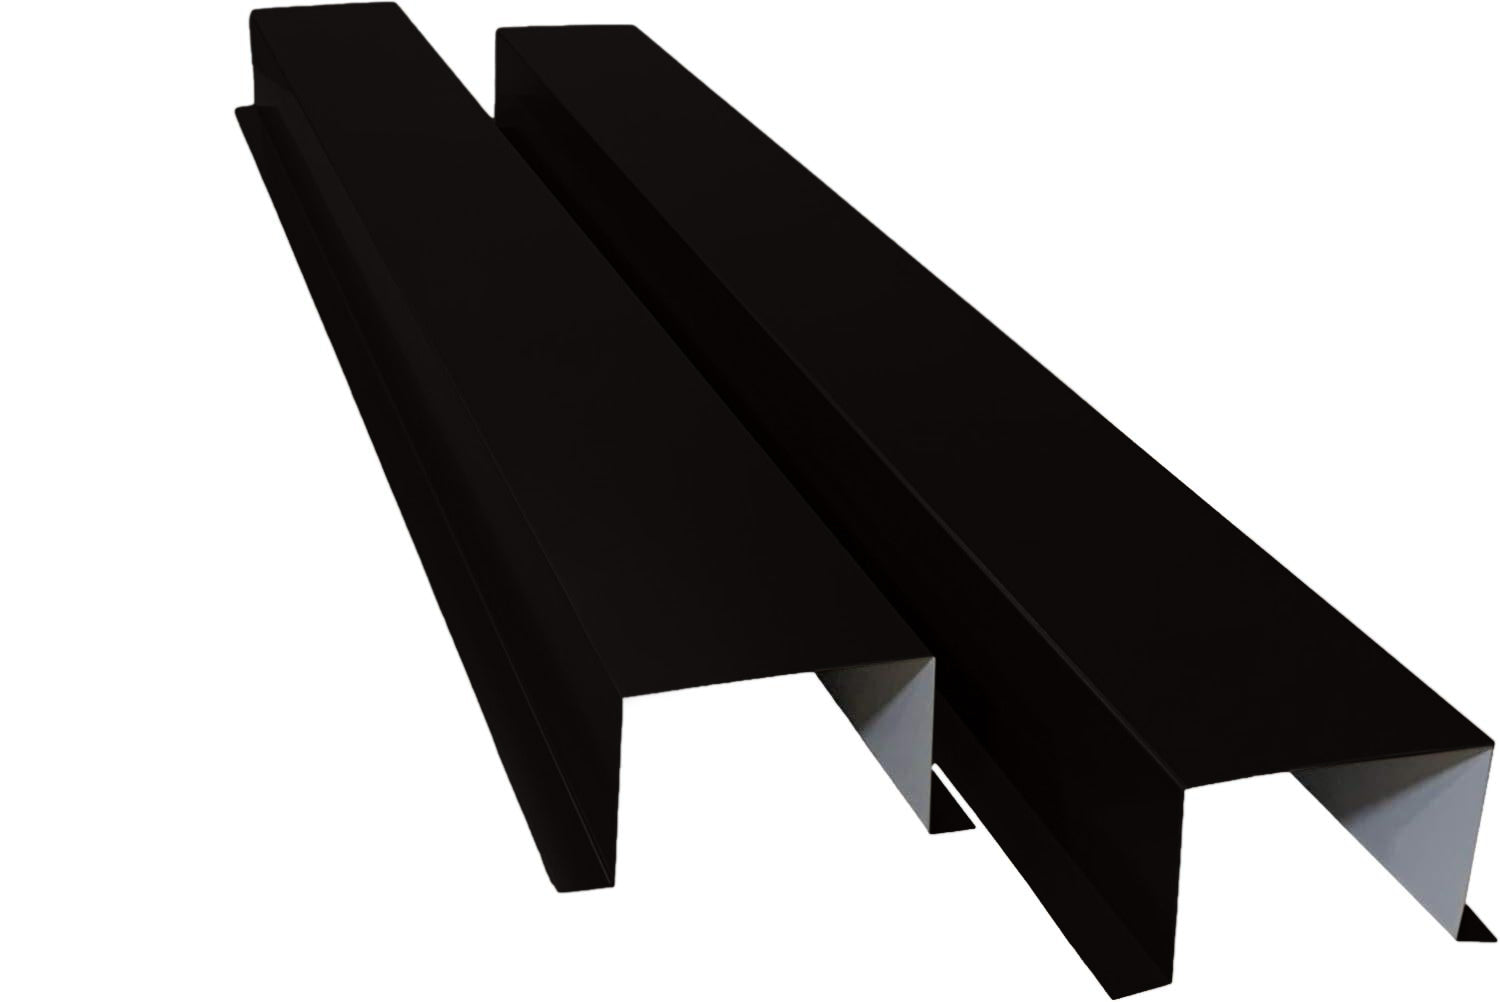 Two long, black steel brackets designed for Perma Cover Commercial Series - 24 Gauge Painted Metal HVAC Line Set Covers - Heavy Duty, Multiple Sizes & Colors are shown against a white background. Made from 24 Gauge Painted Metal, the brackets have a rectangular cross-section with one shorter side, likely for mounting or structural support purposes and HVAC line protection.